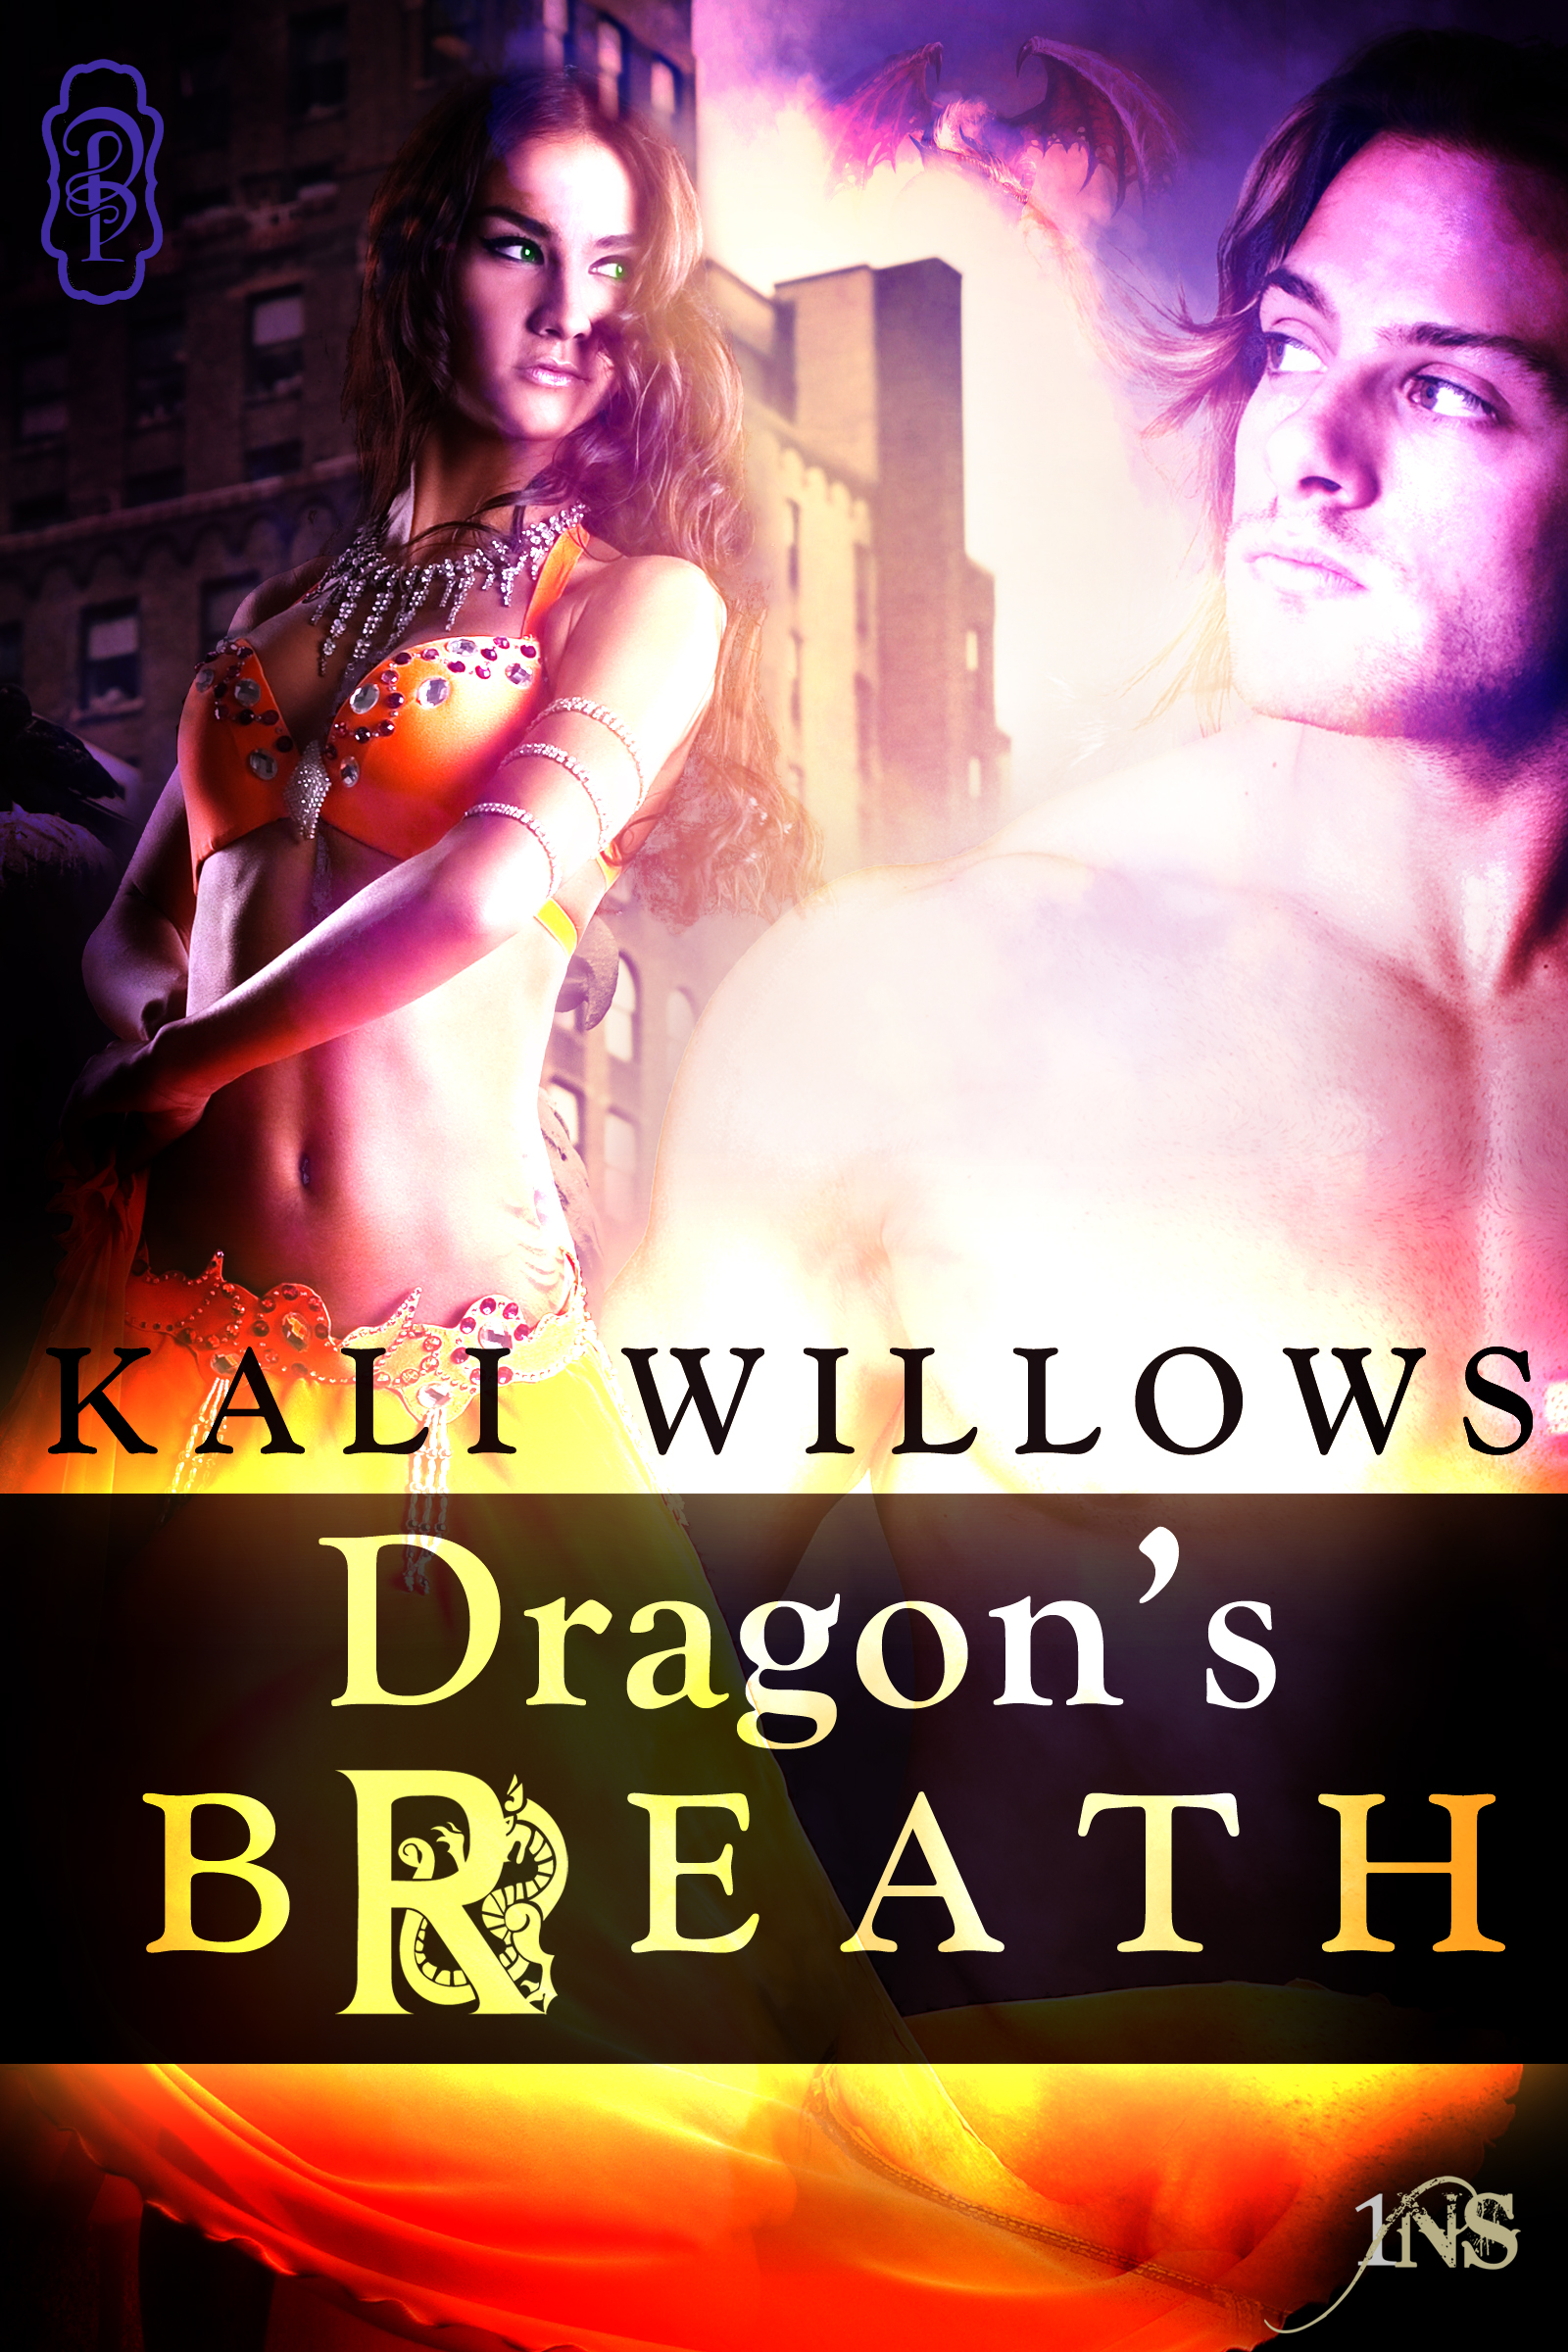 Dragon’s Breath by Kali Willows